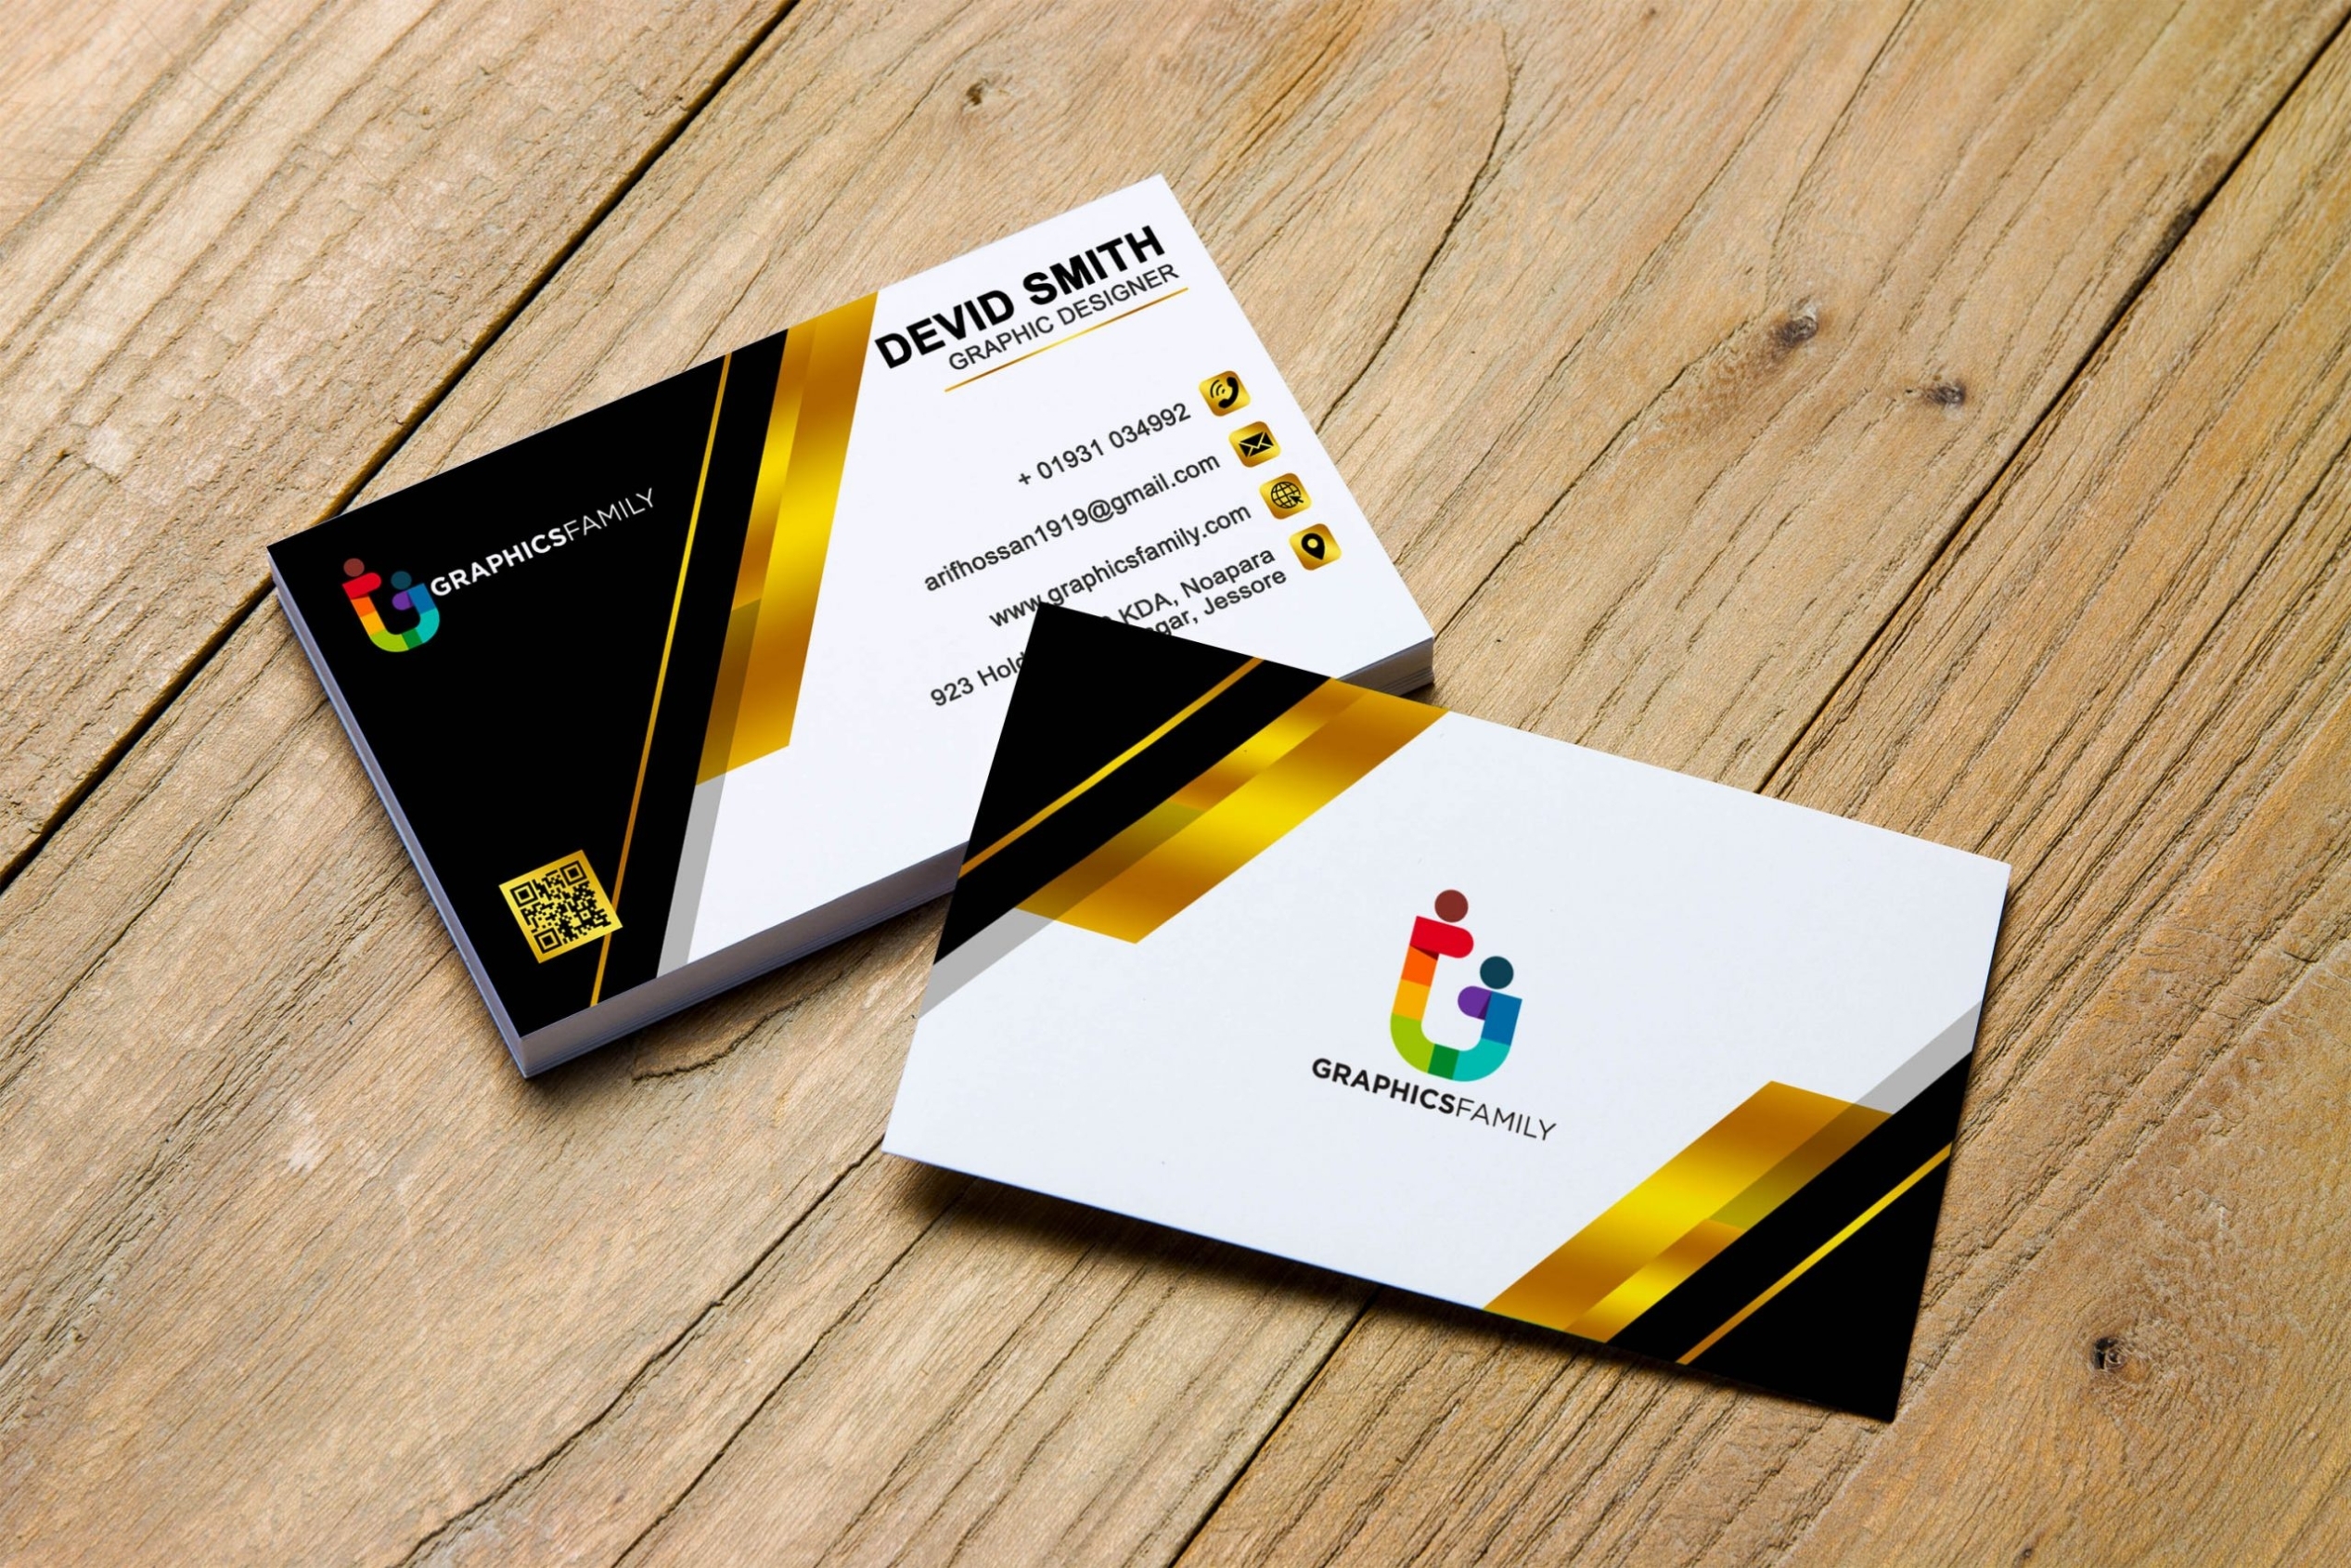 Free Accounting Analyst Business Card .Psd Template - Graphicsfamily with regard to Free Business Card Templates In Psd Format